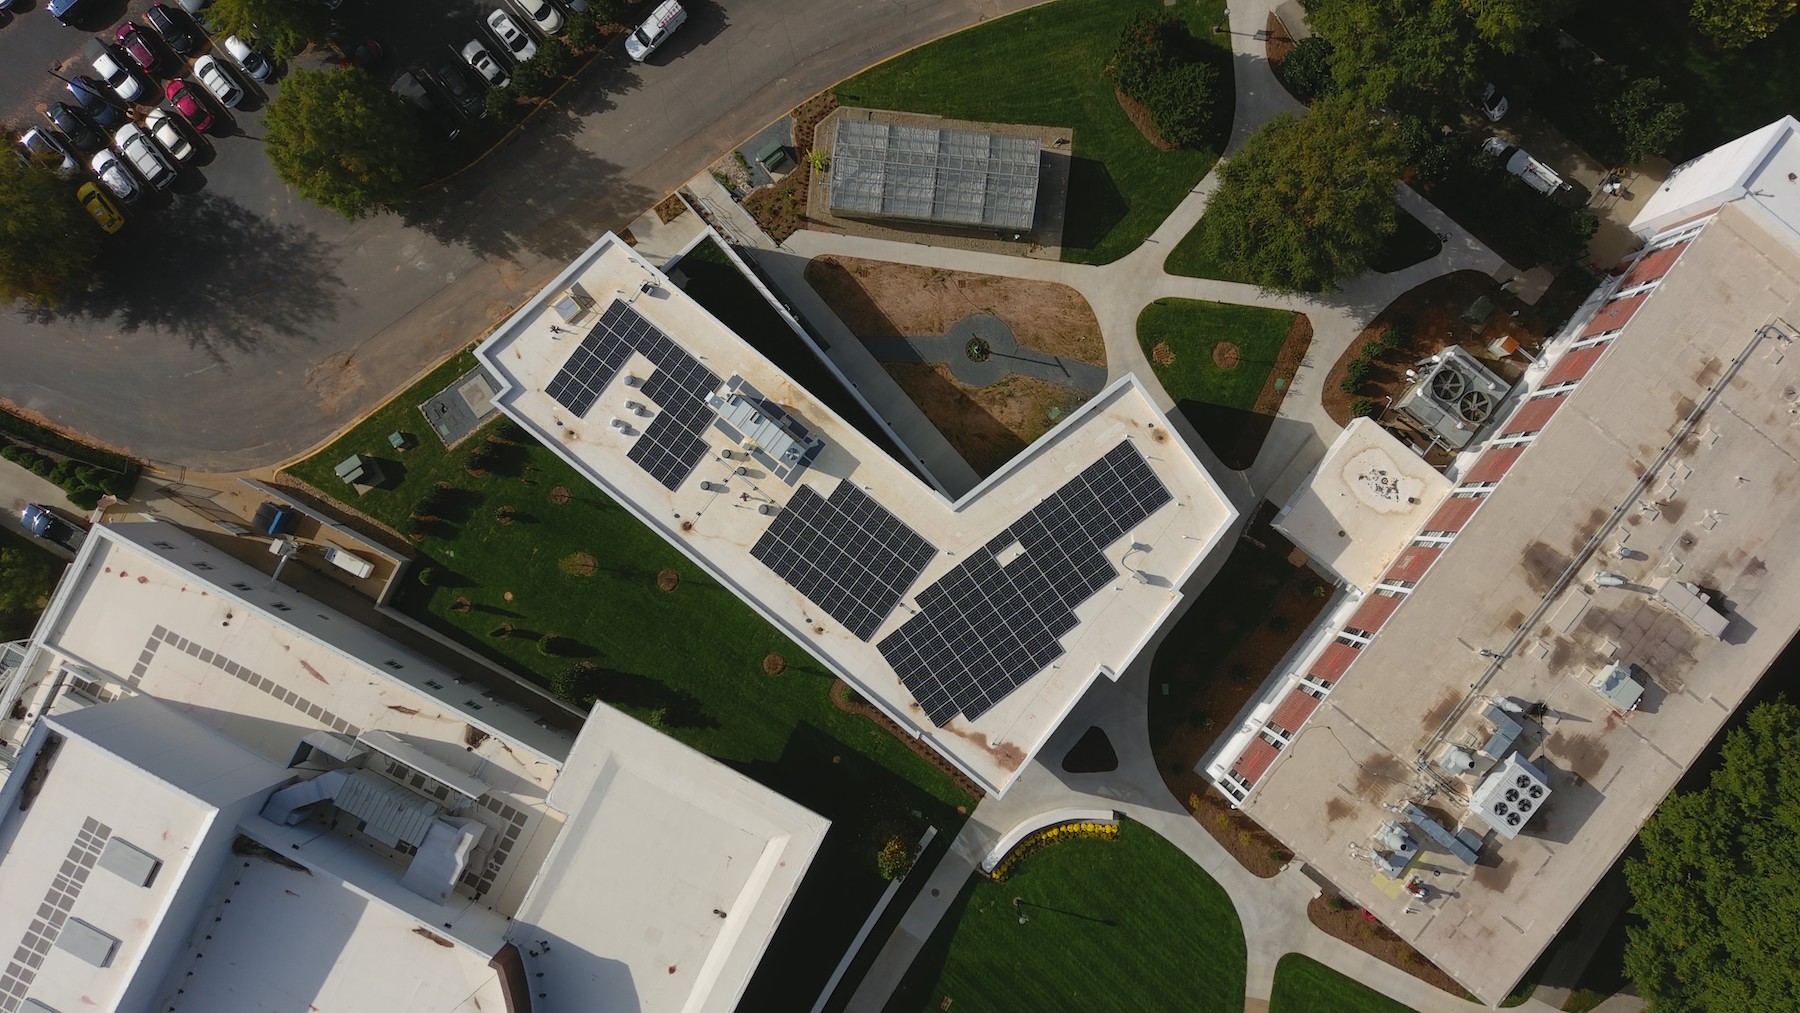 Solar panels were among this project's sustainable elements.